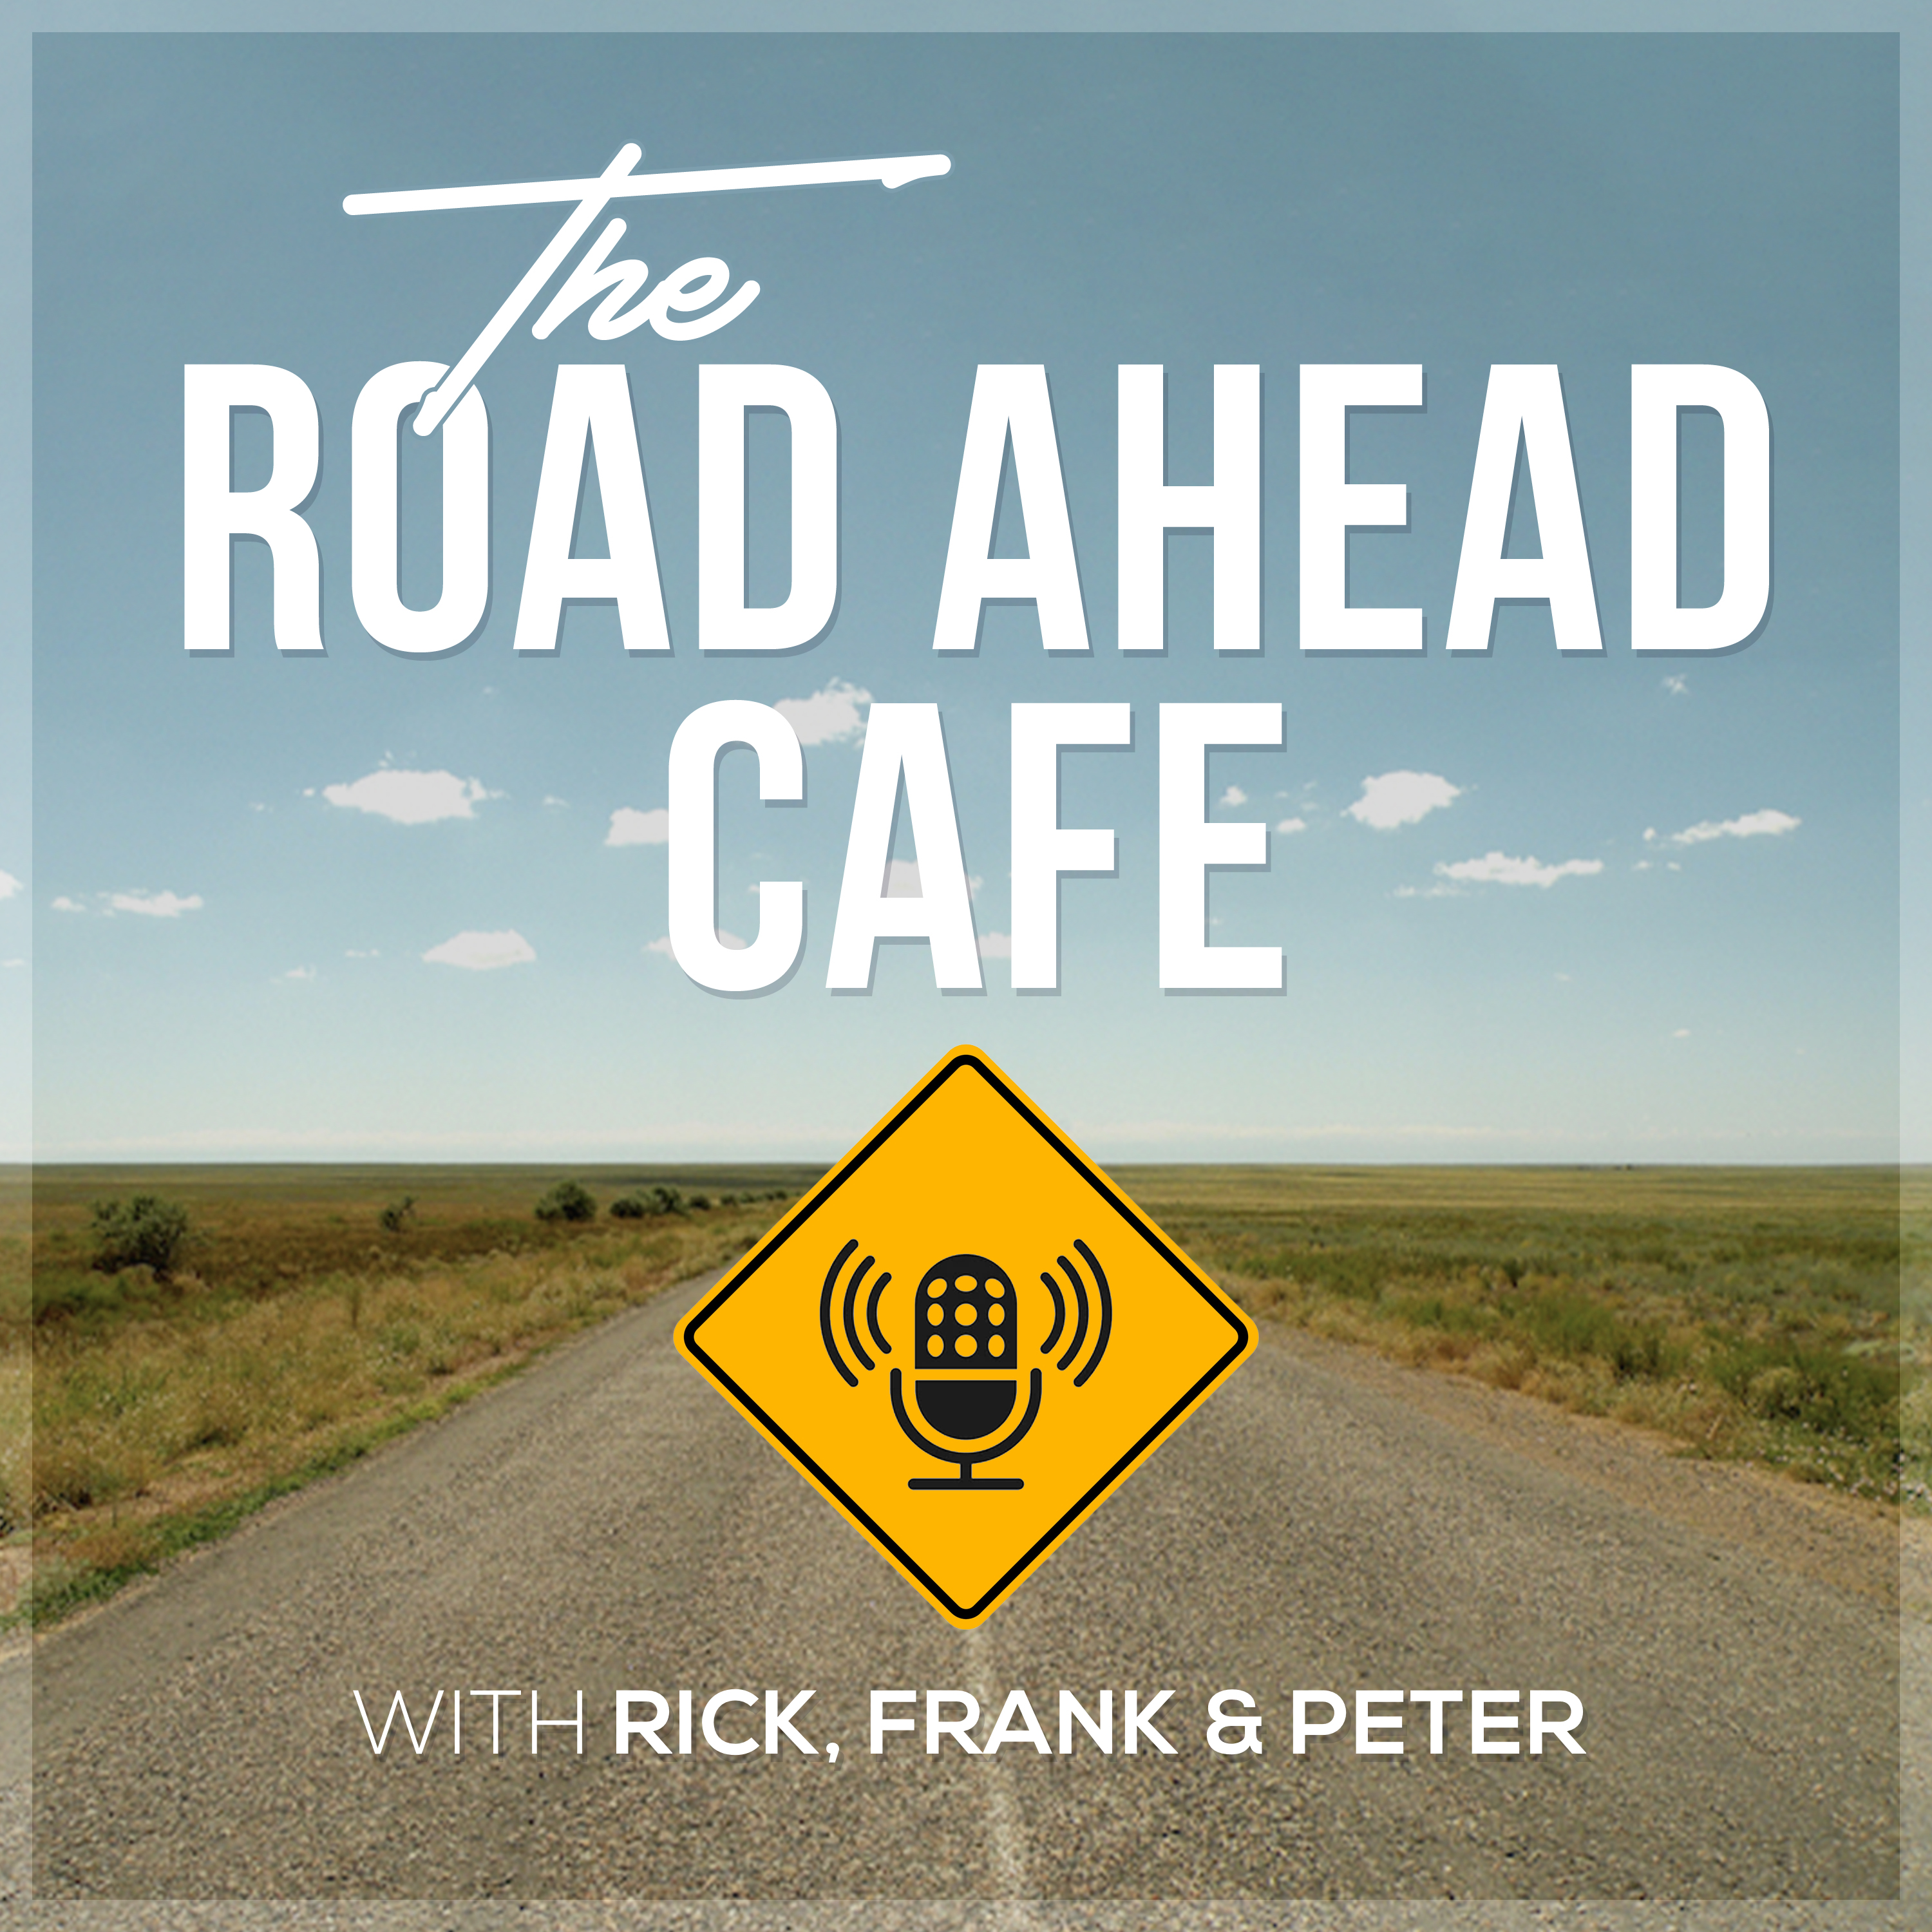 The Road Ahead Cafe